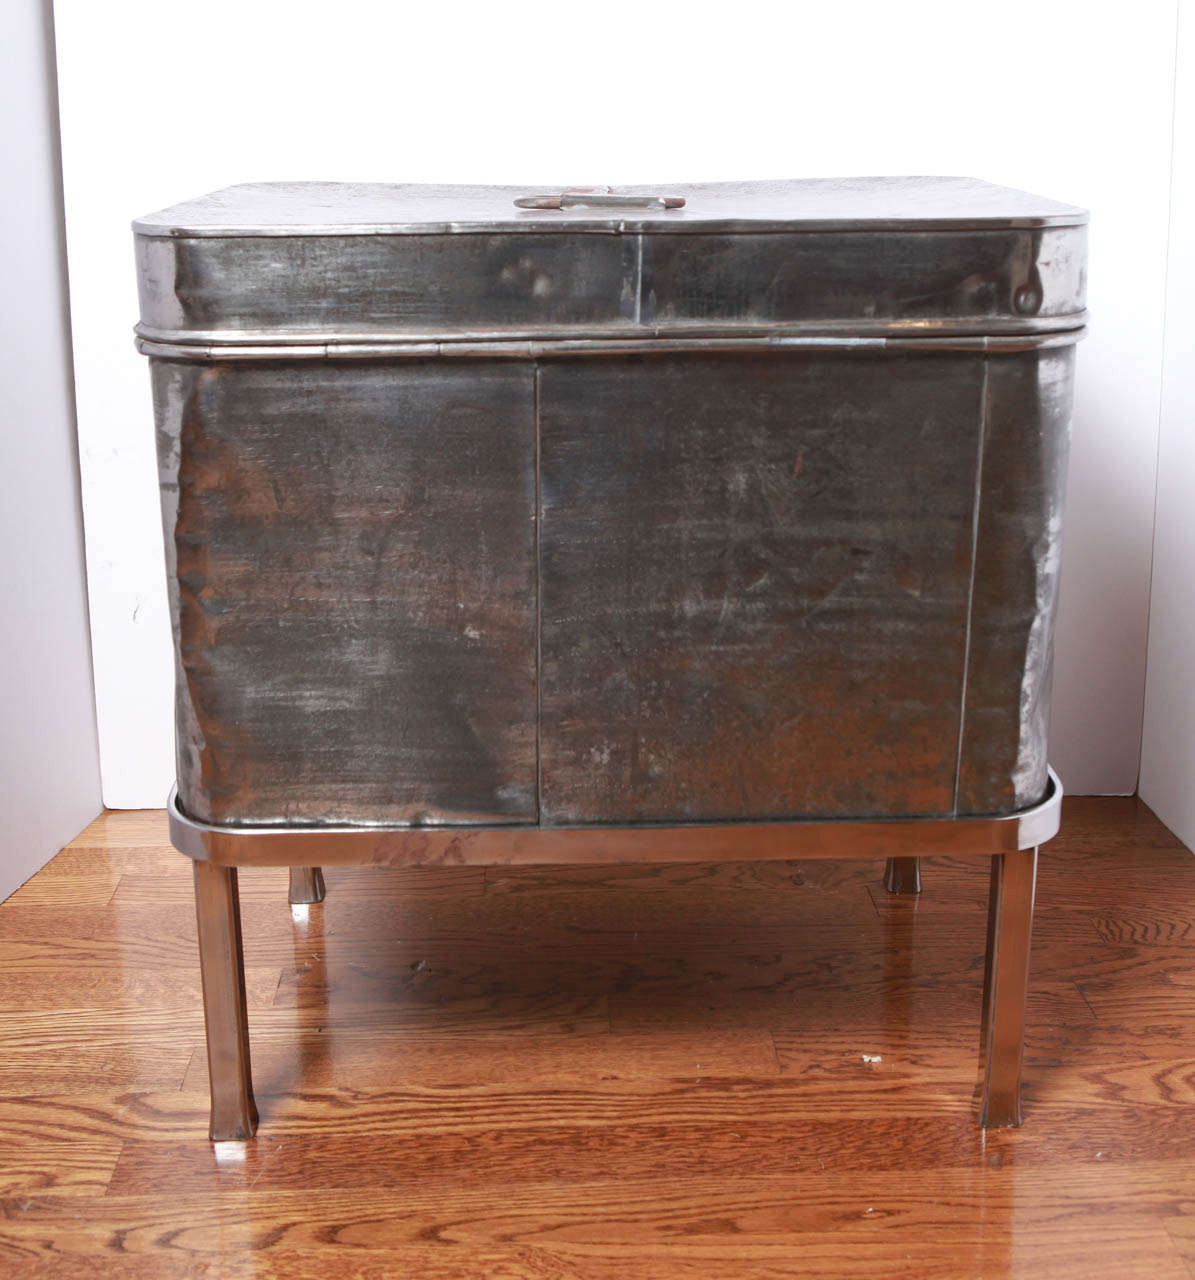 This 19th century steel hat box on metal legged stand could easily hold your 